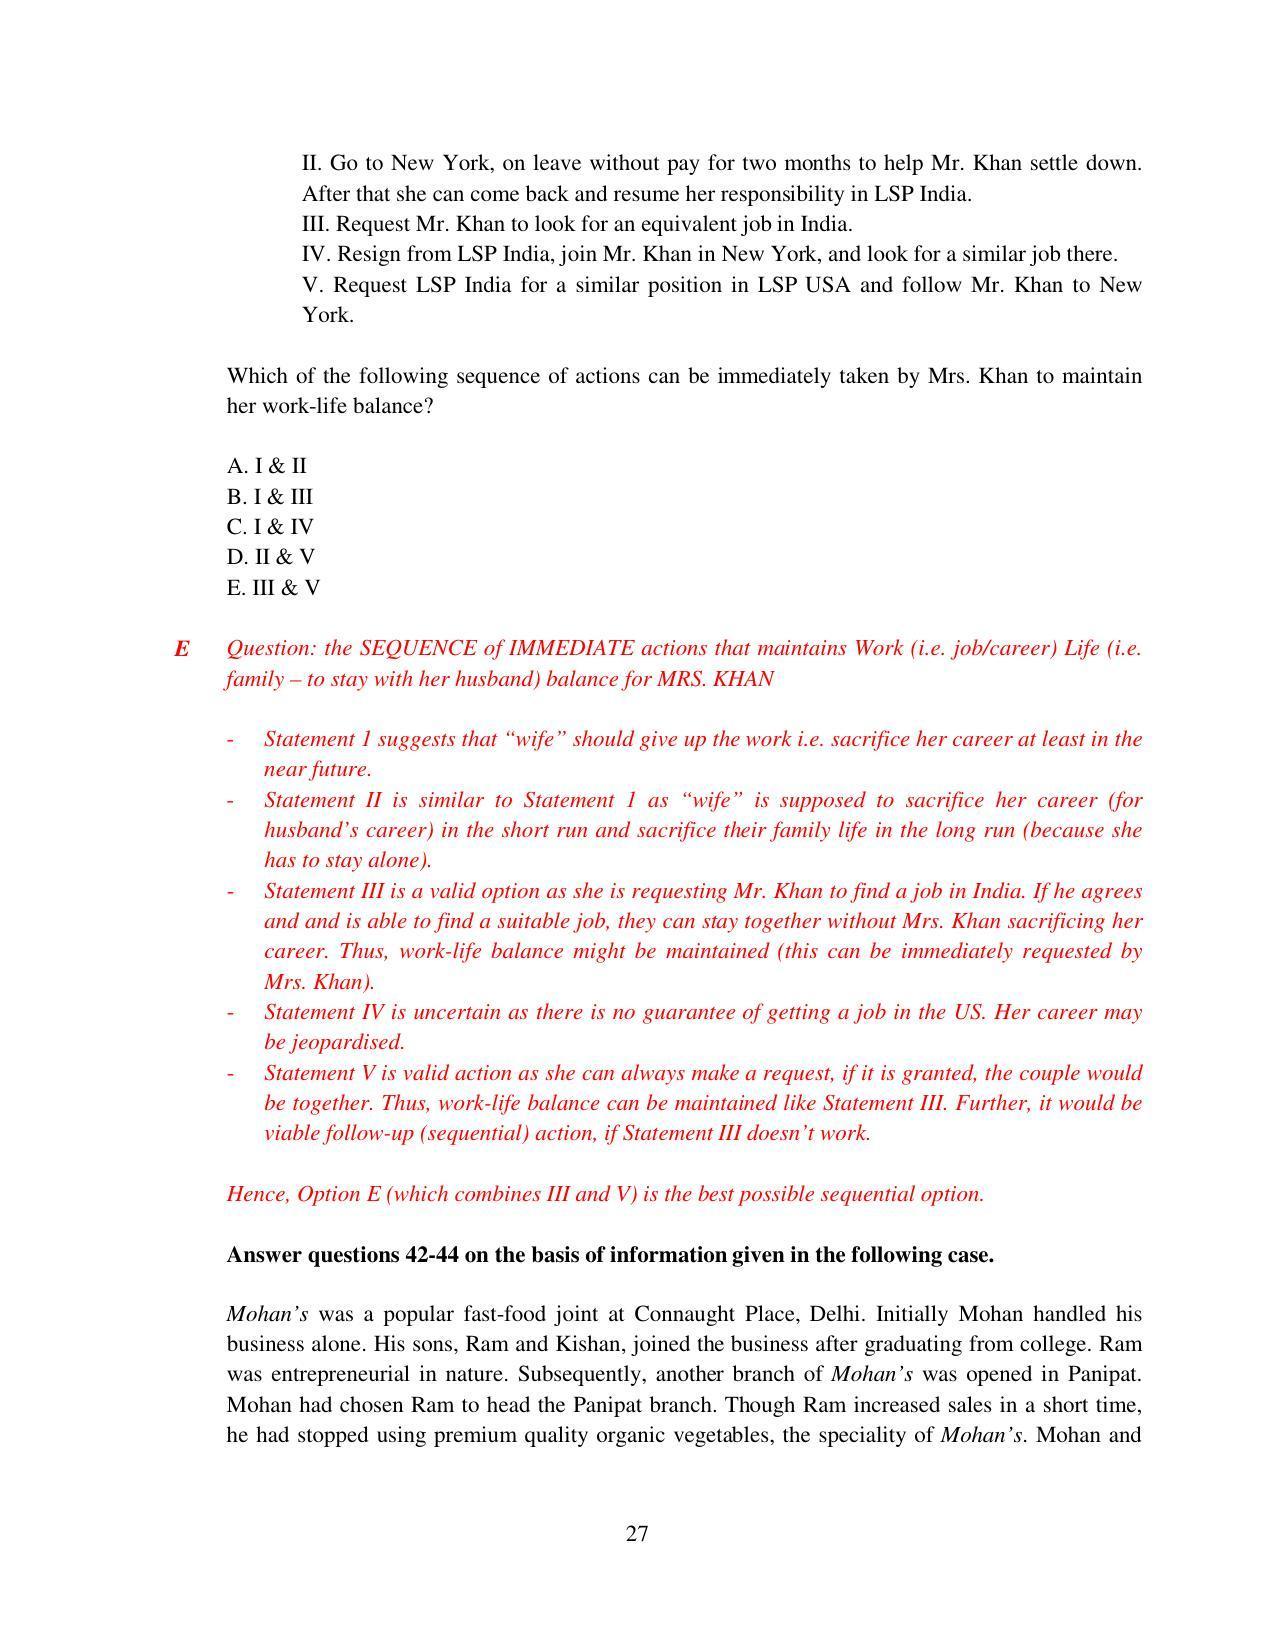 XAT 2015 Set D Question Papers - Page 28